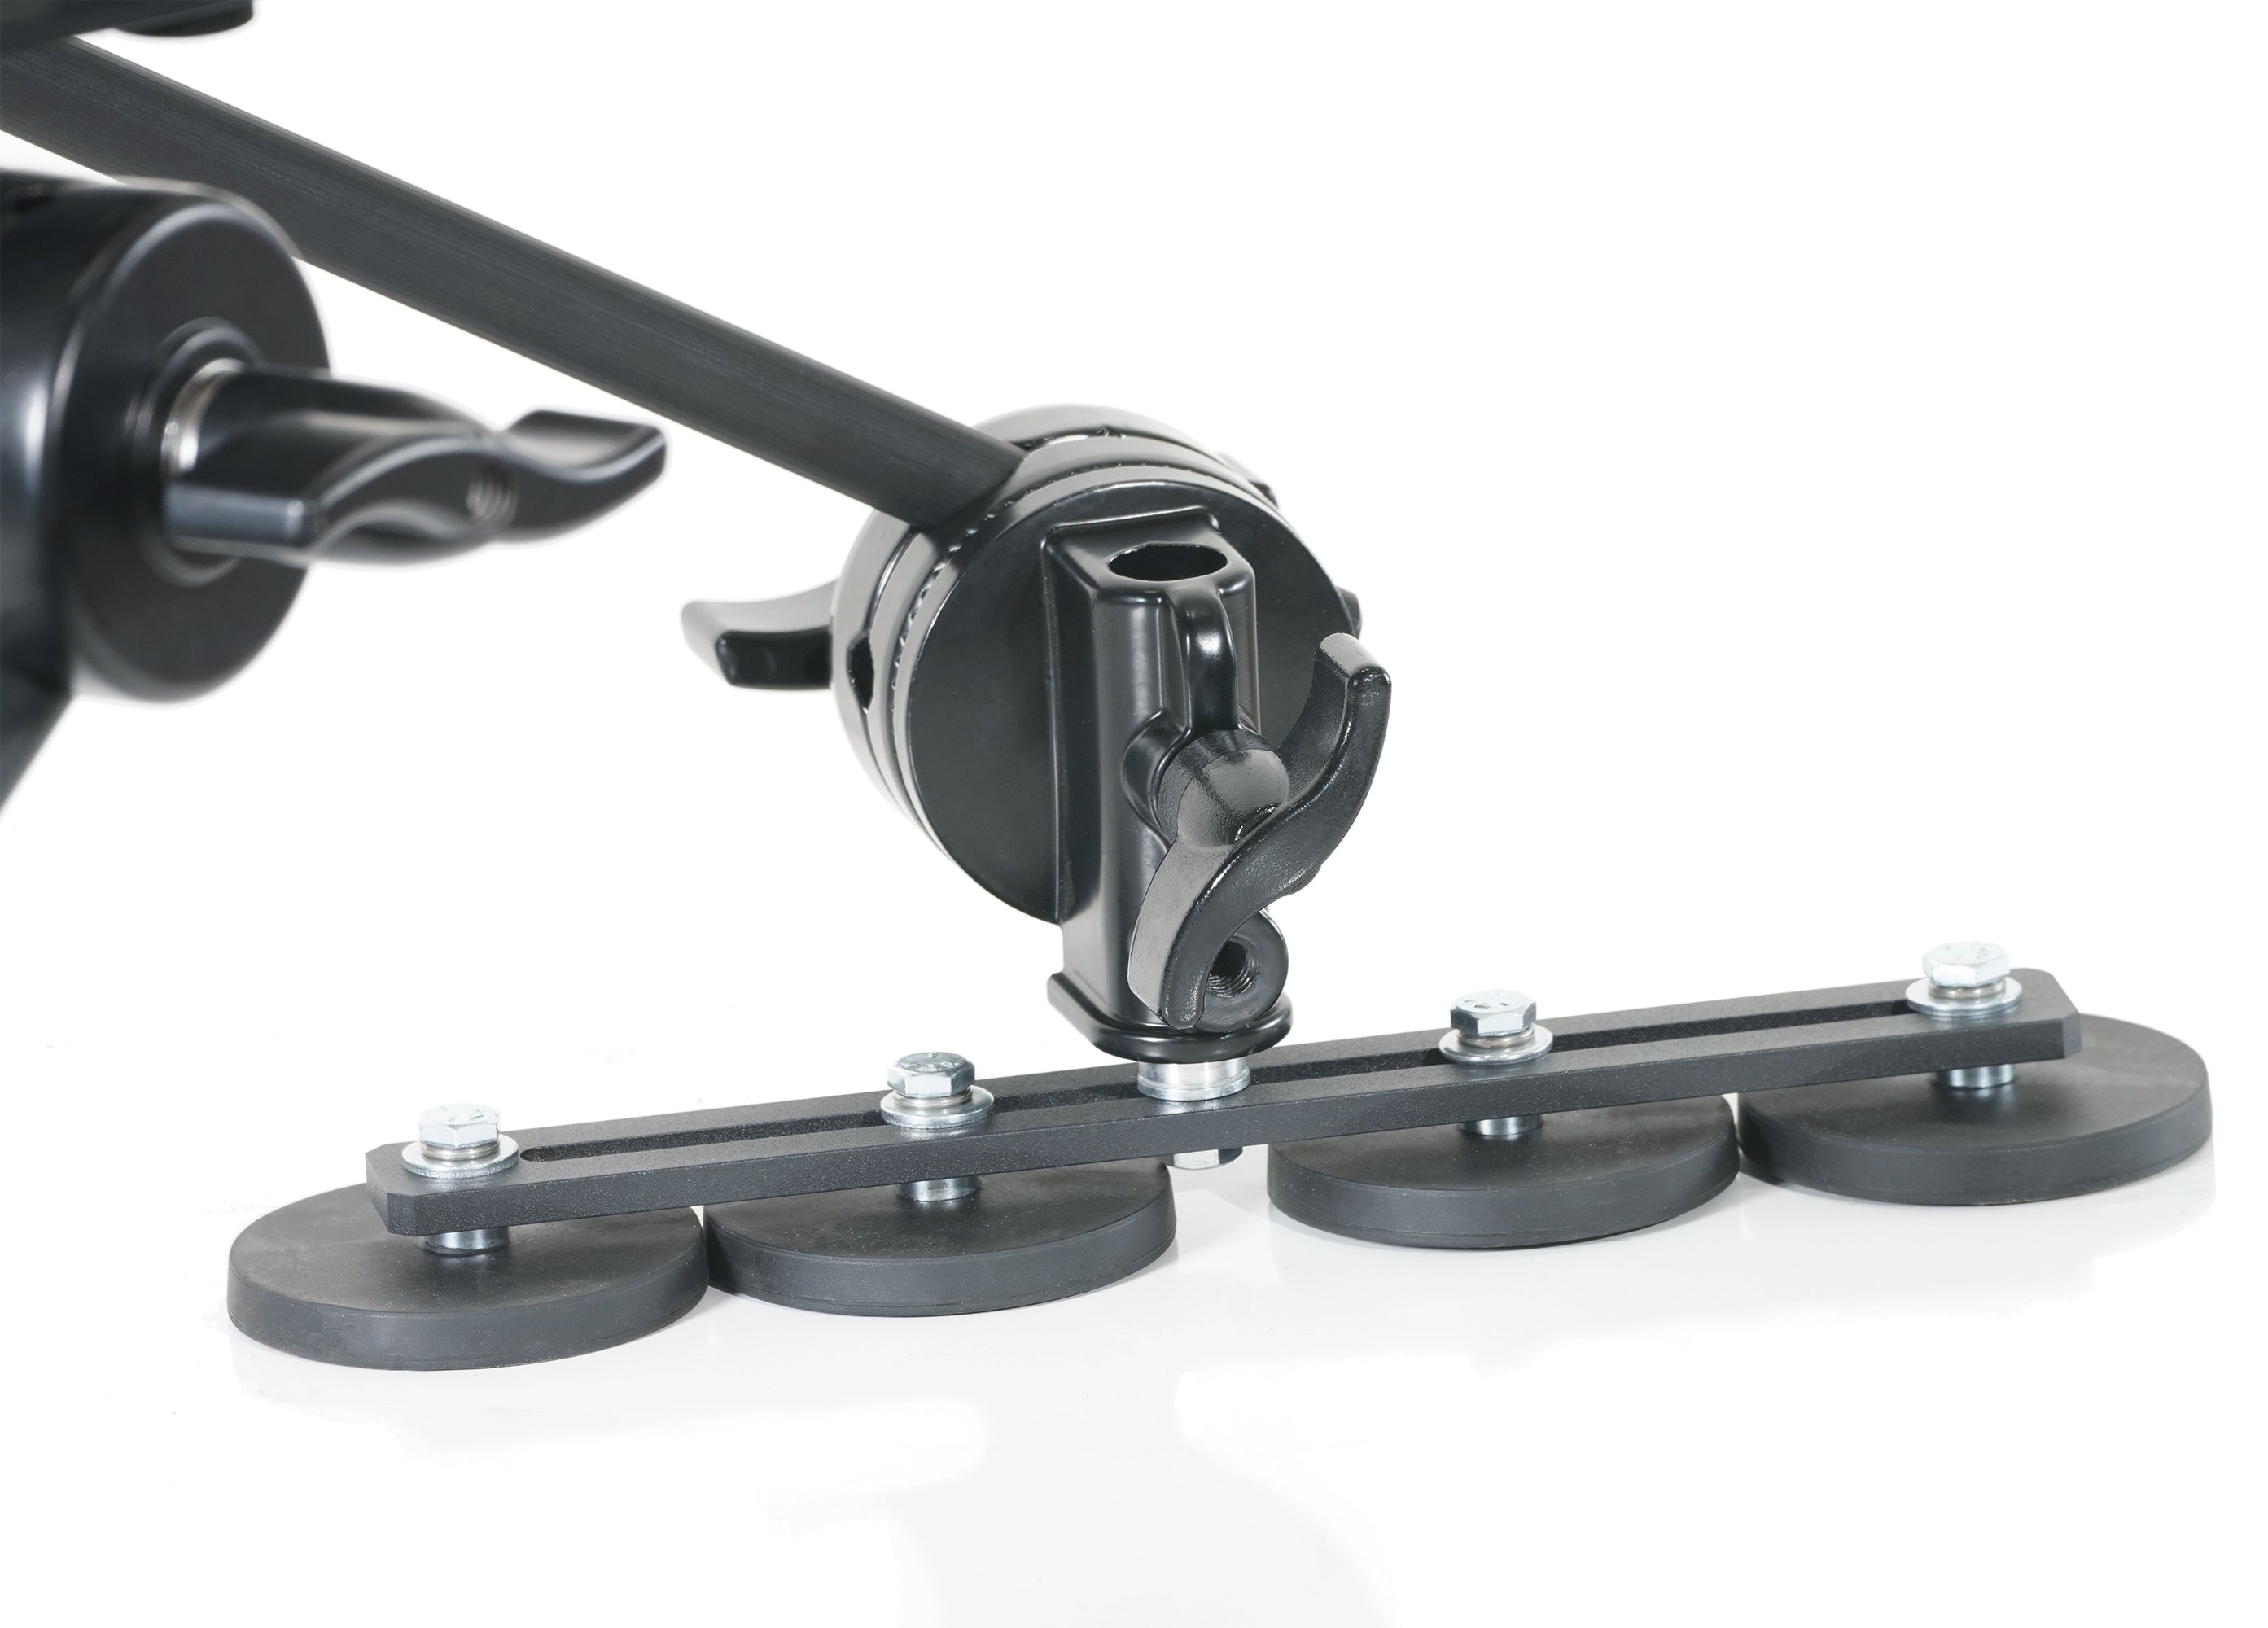 Modus Camera Mounting System IV - 2 Platforms with Wire Sets and 3 Magnet Arms